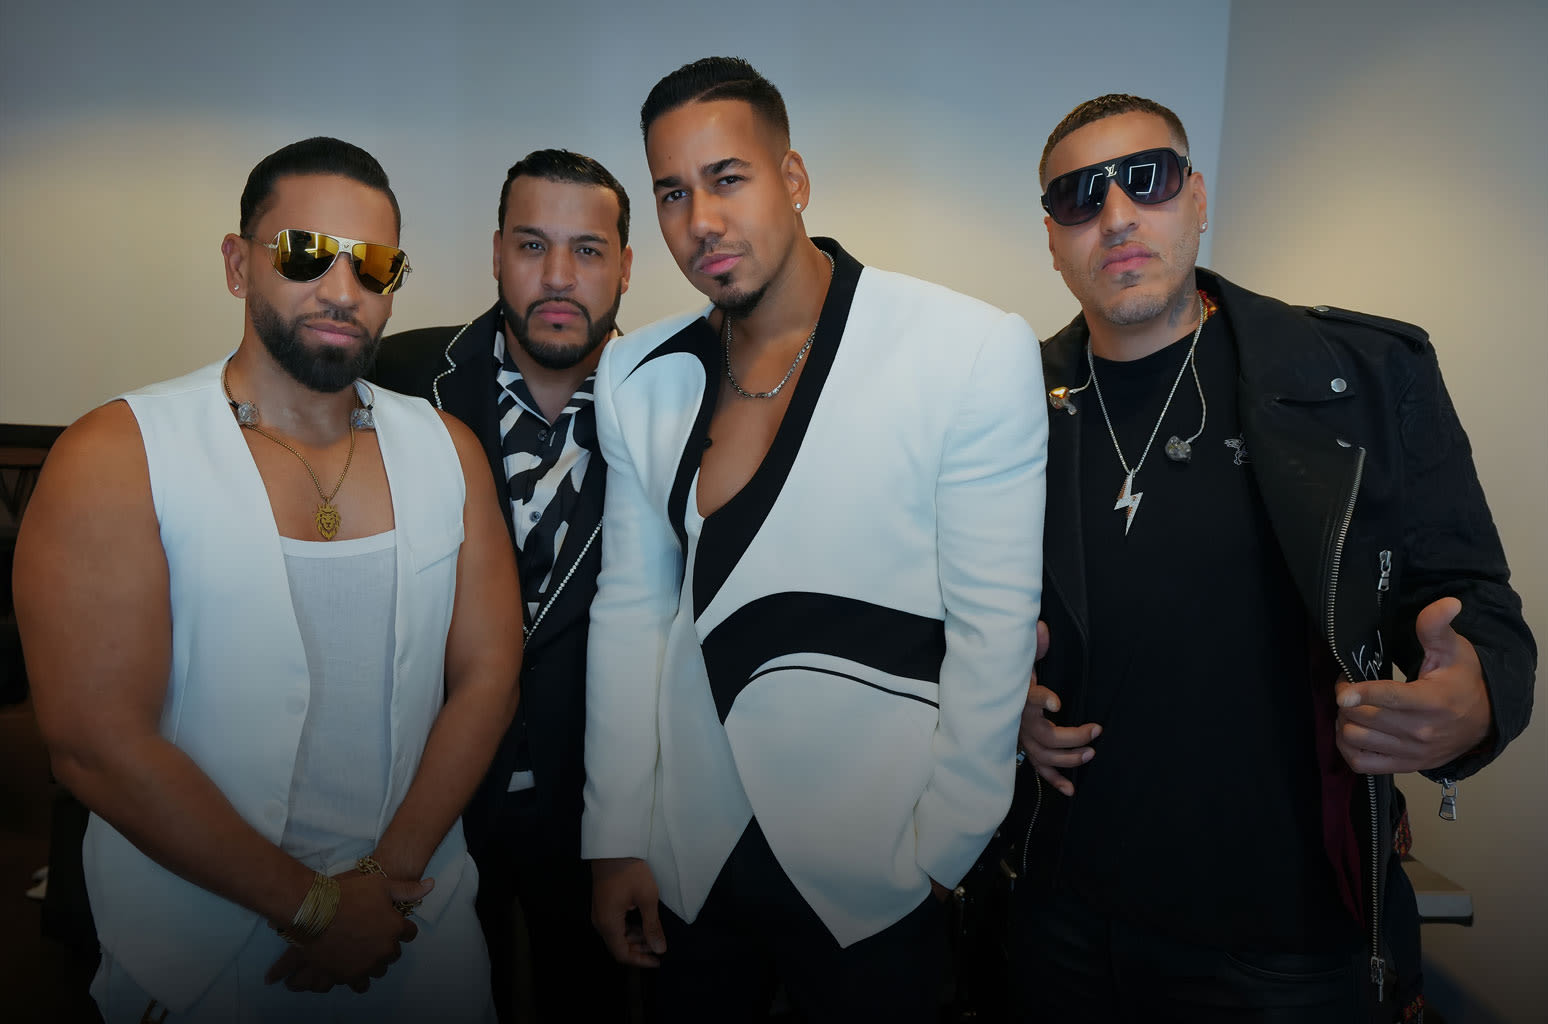 Aventura Lights Up Madison Square Garden 14 Years Later, Brings Judy Santos for ‘Obsession’